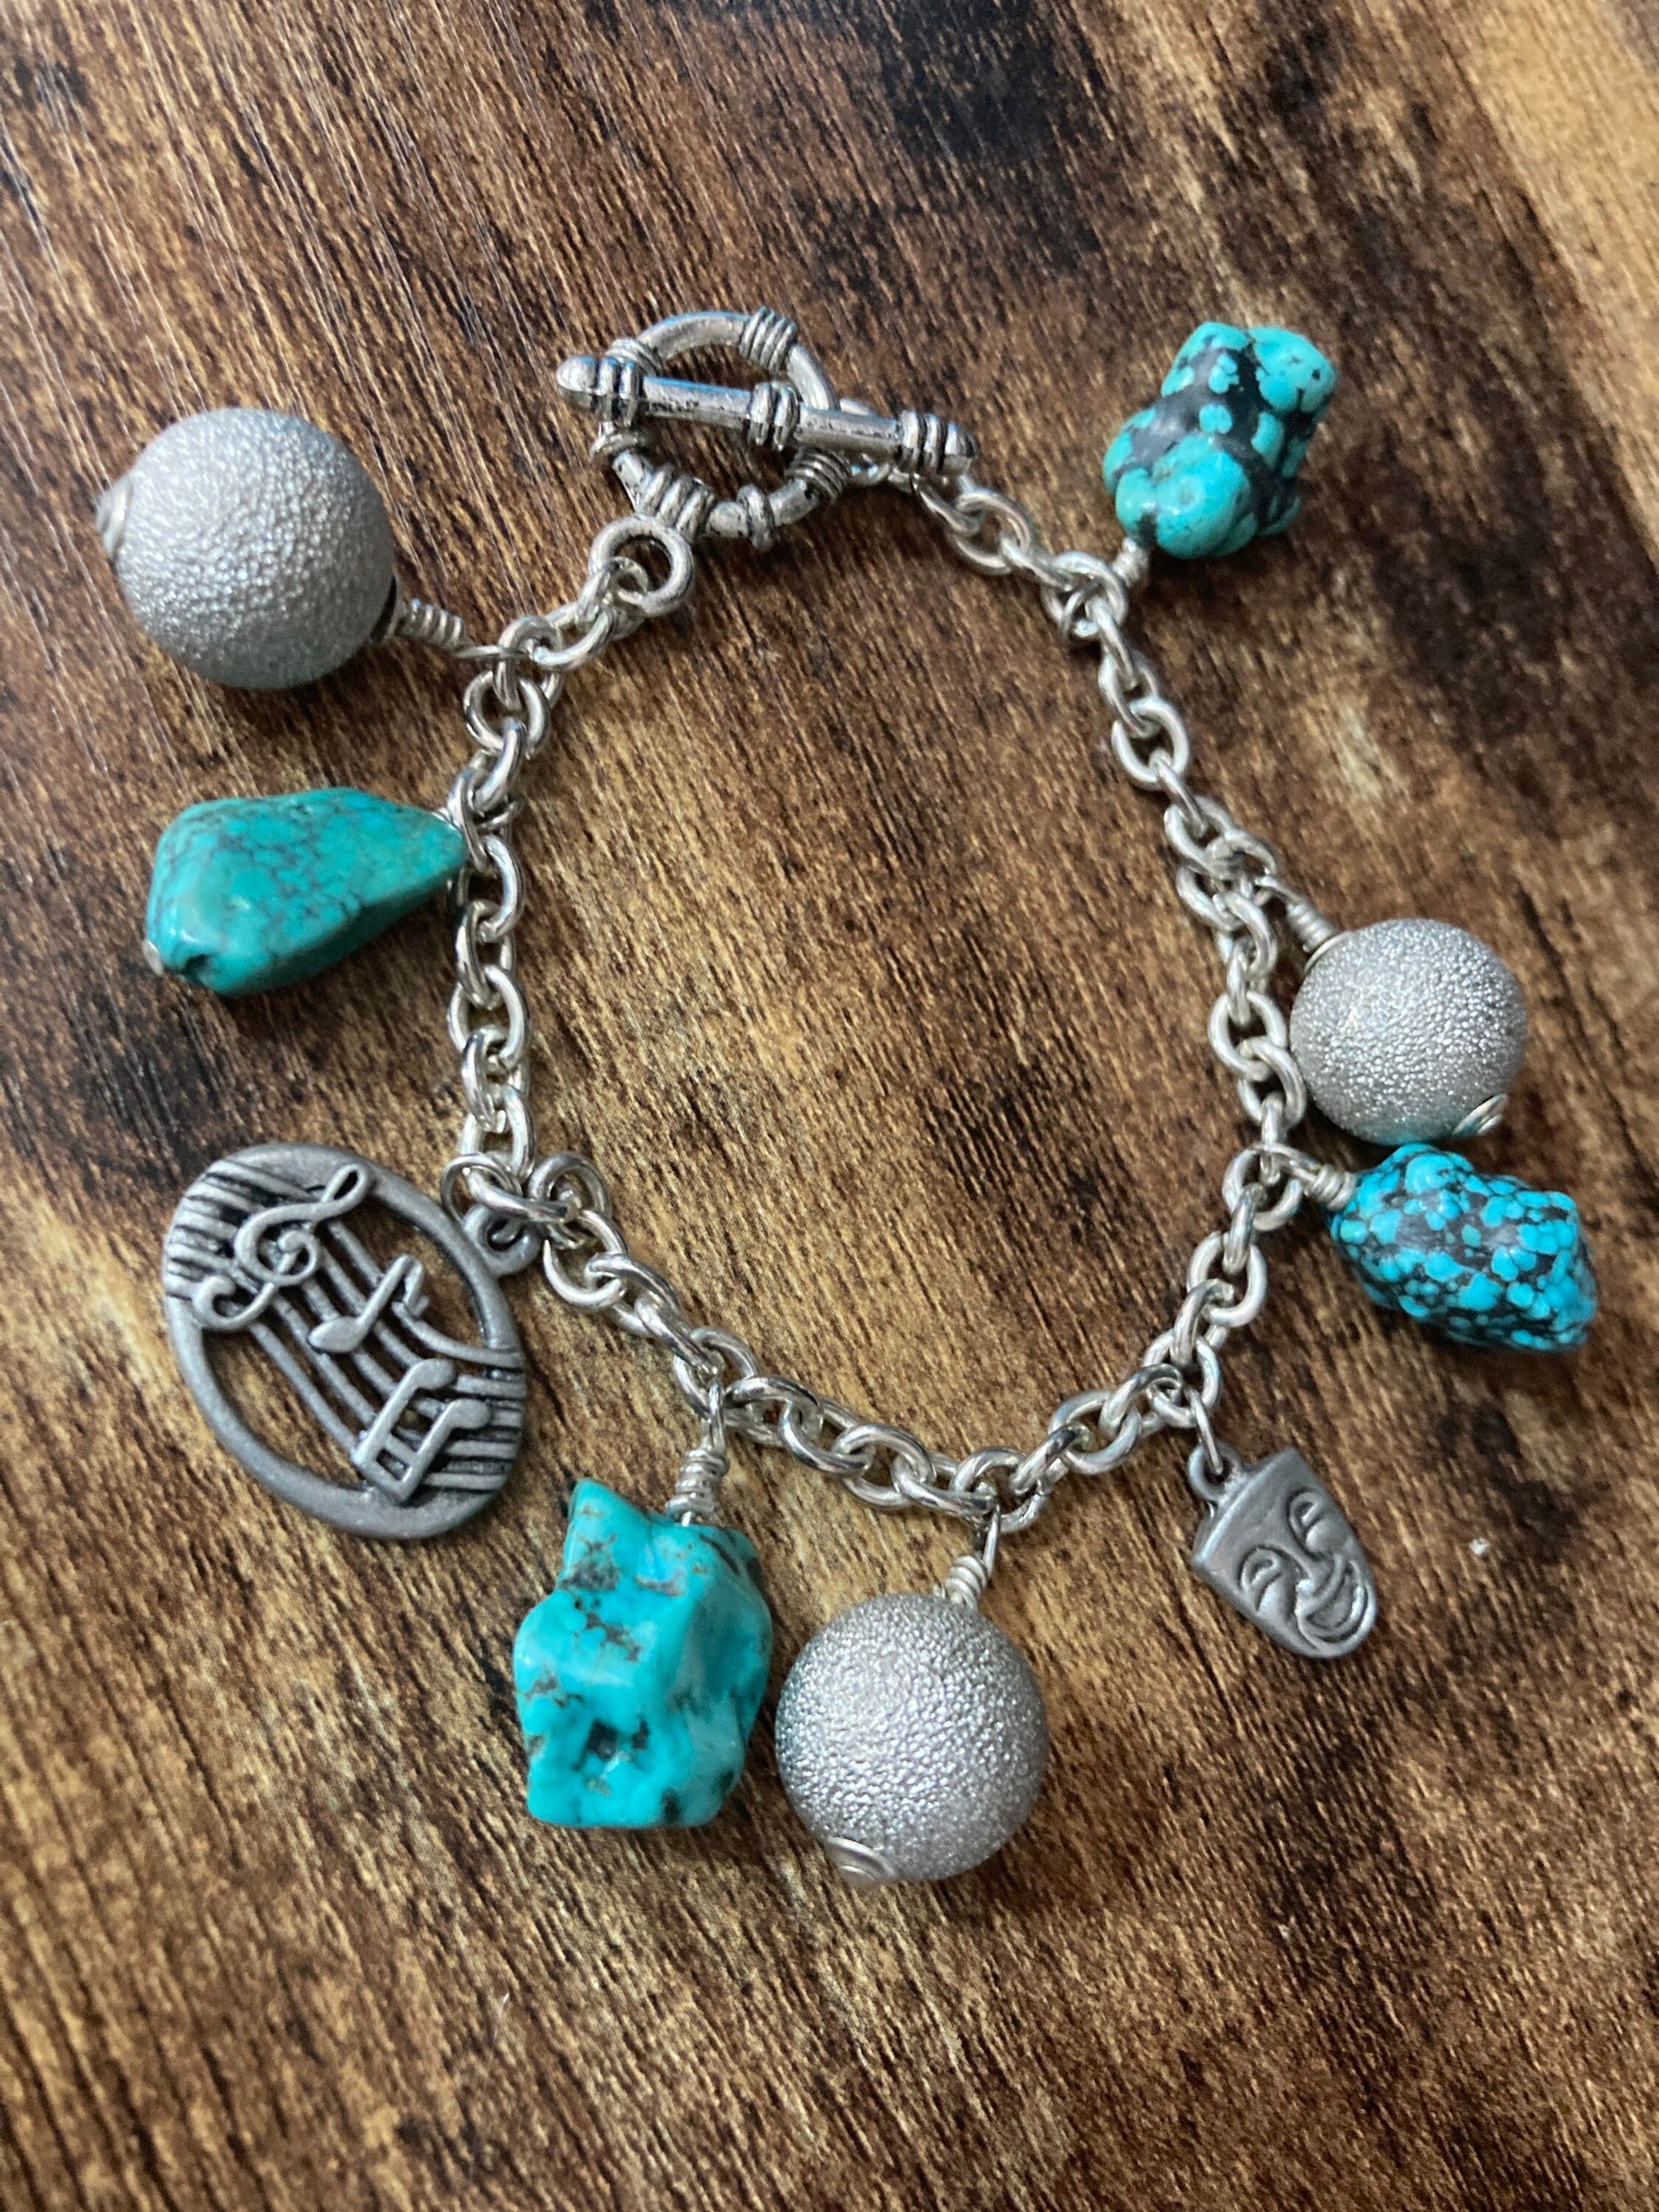 retro charm bracelet silver tone turquoise blue gemstones musical notes acting actor themed 20cm